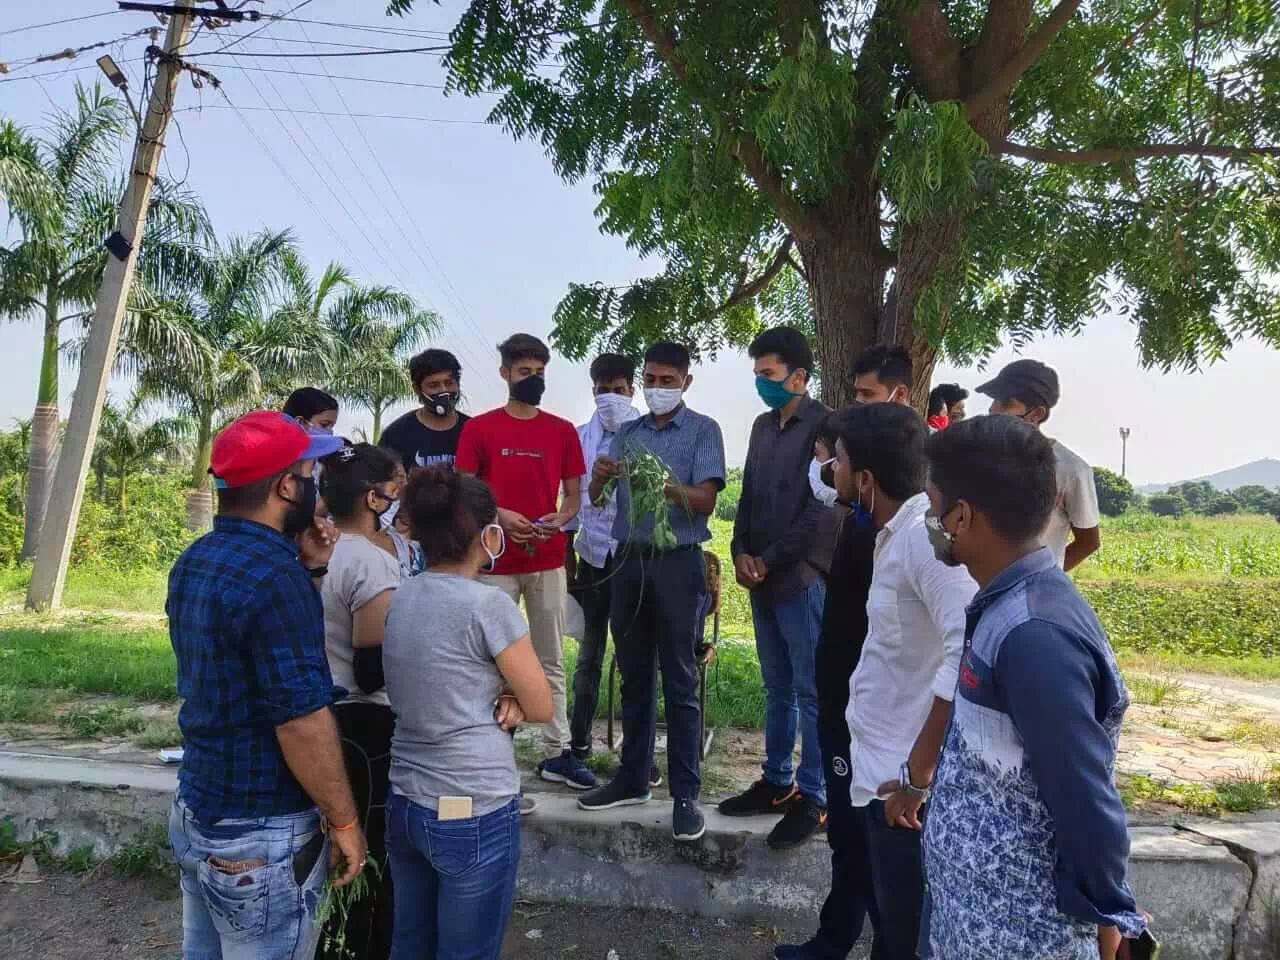 Training on rural agricultural work experience at KVK Udaipur